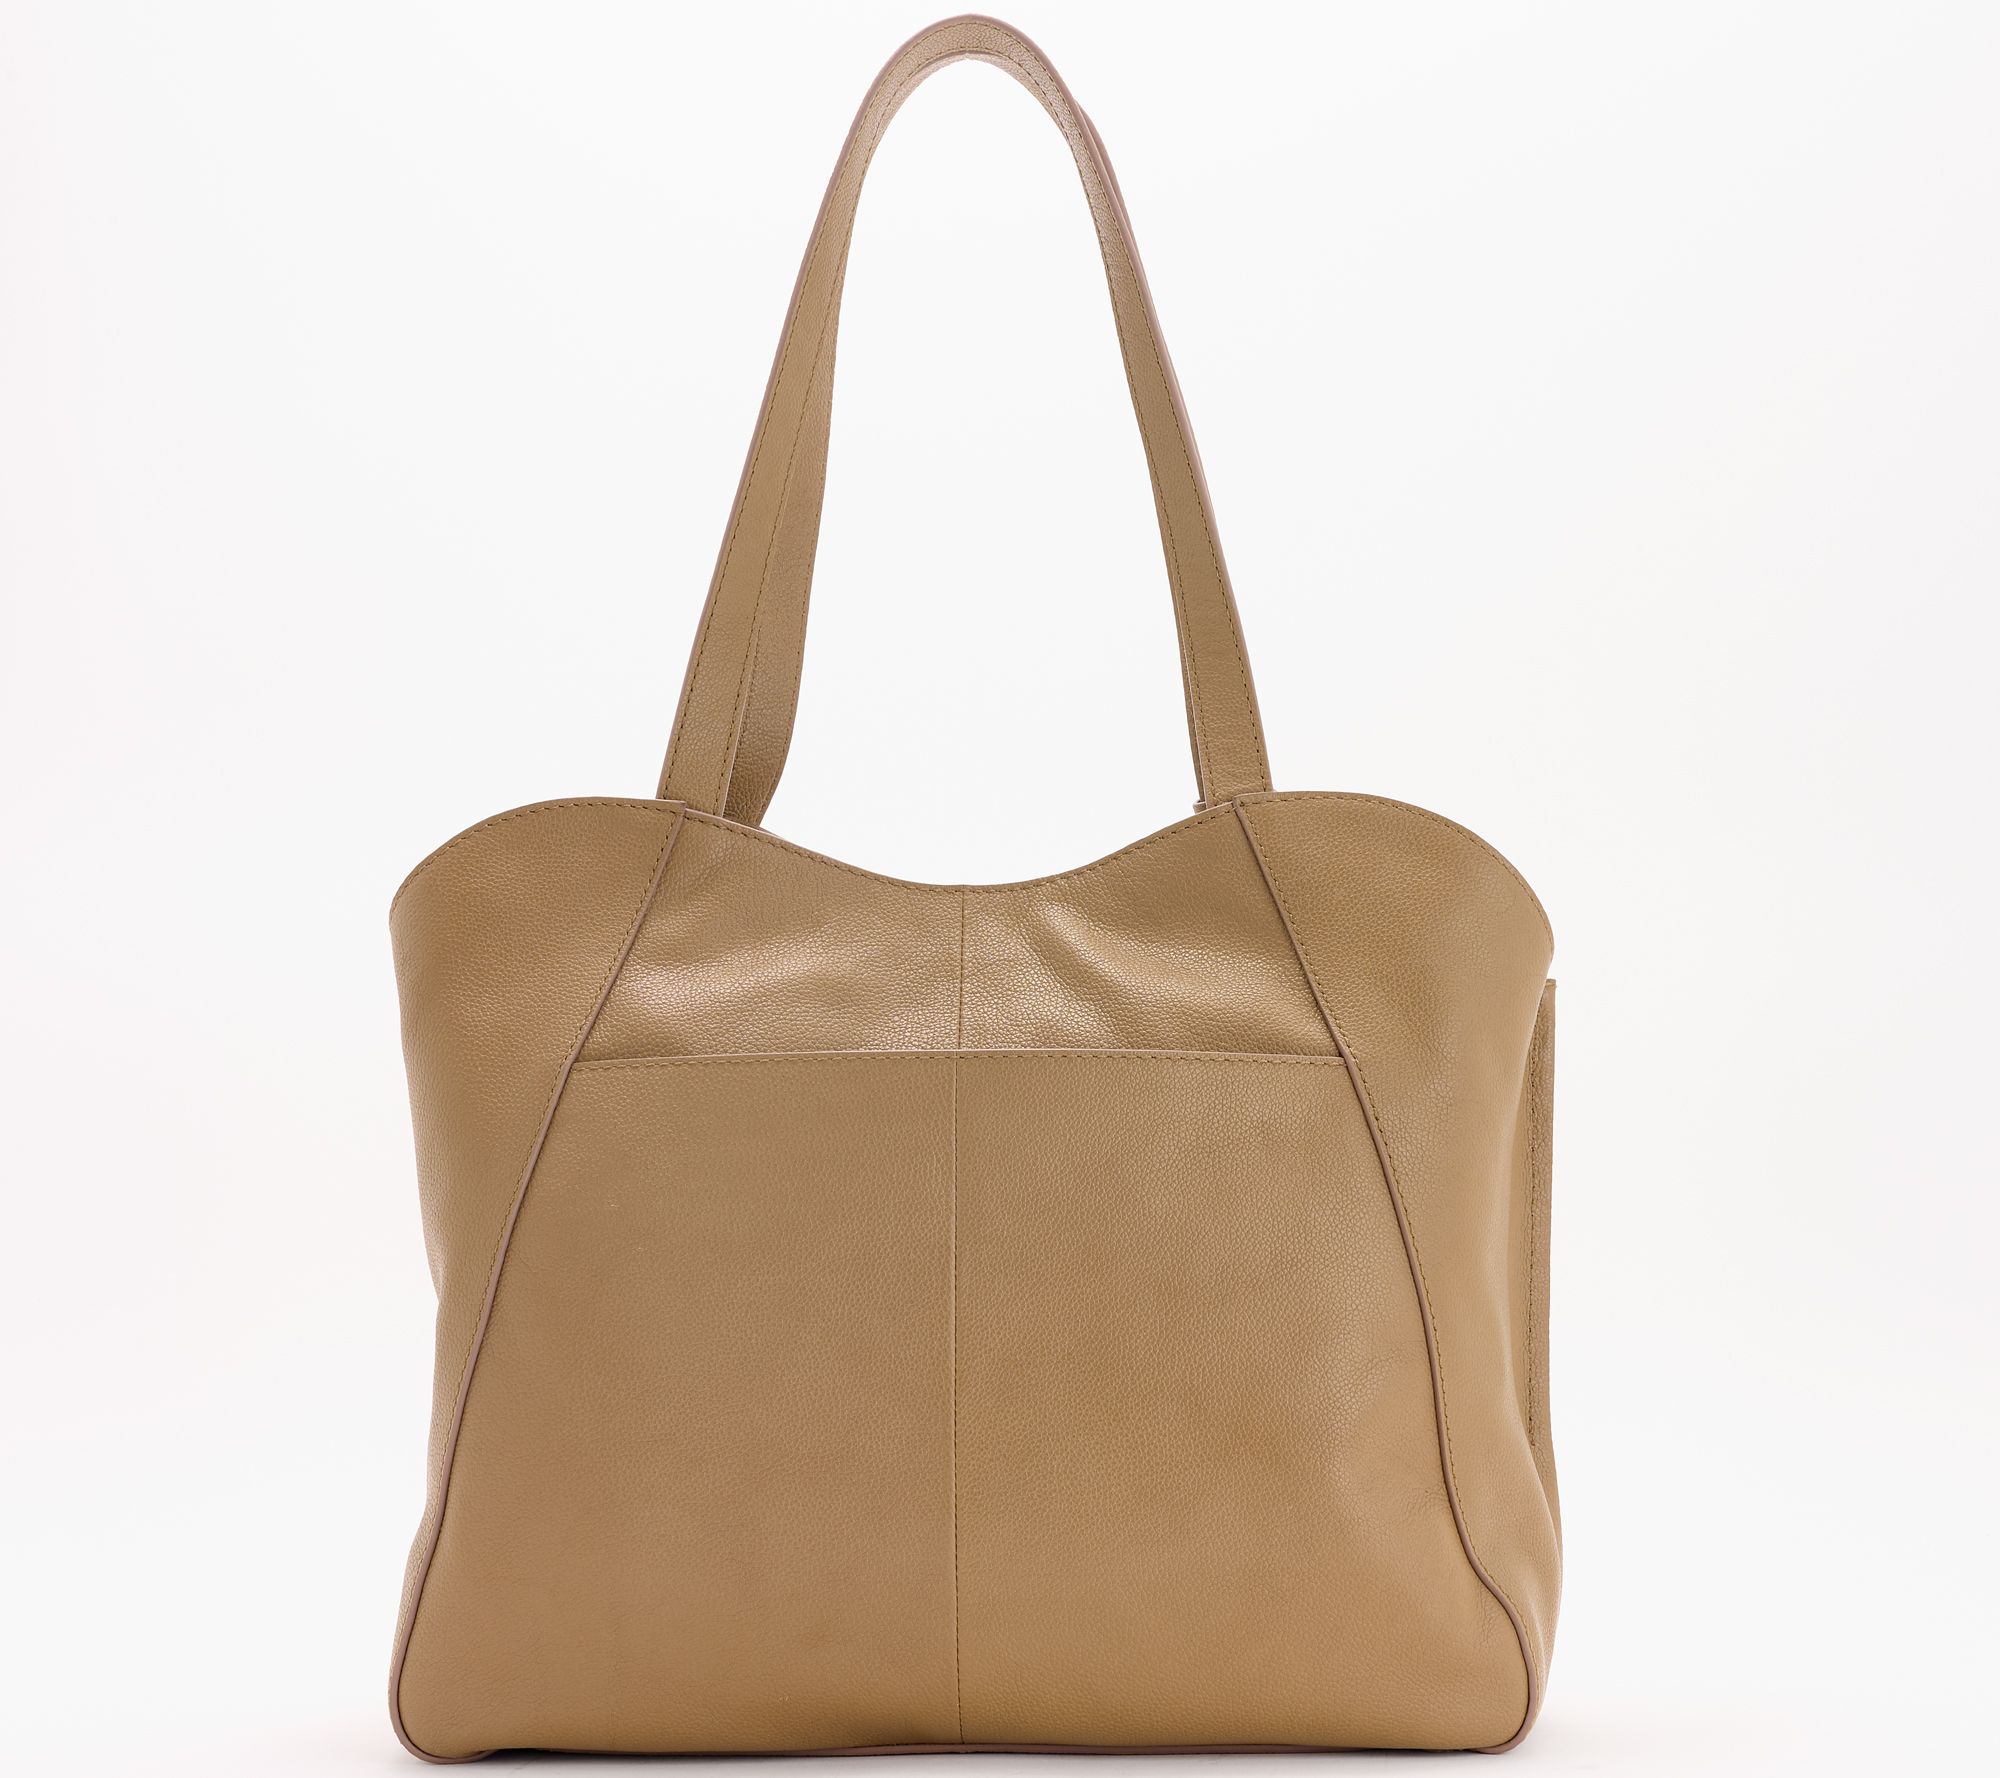 Vince Camuto Leather Kasen Tote - QVC.com